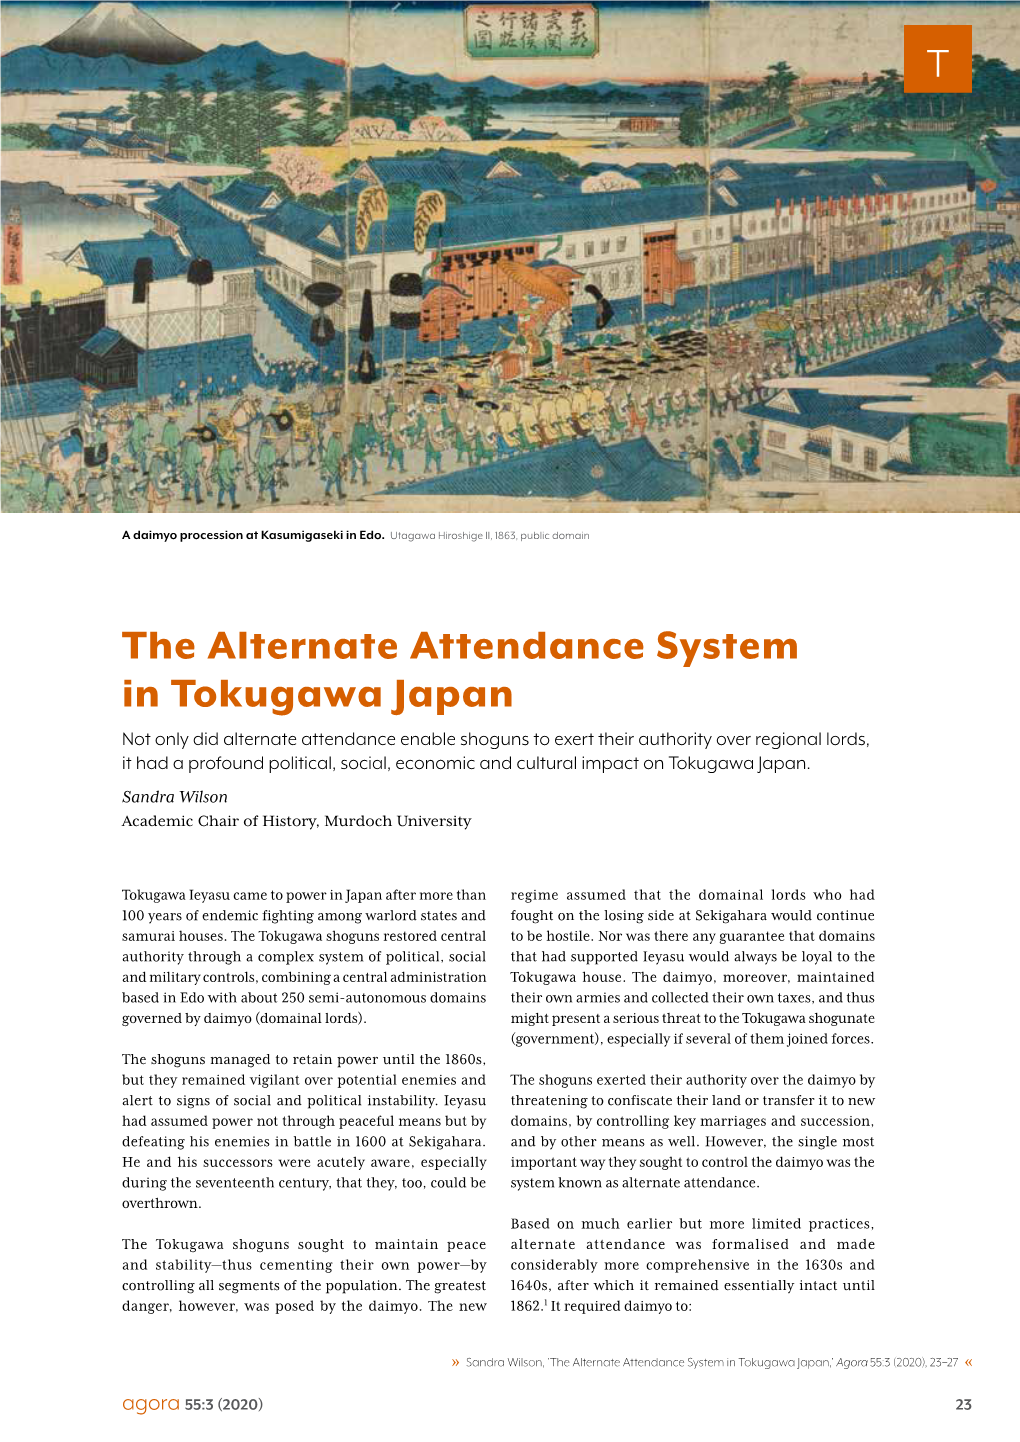 The Alternate Attendance System in Tokugawa Japan